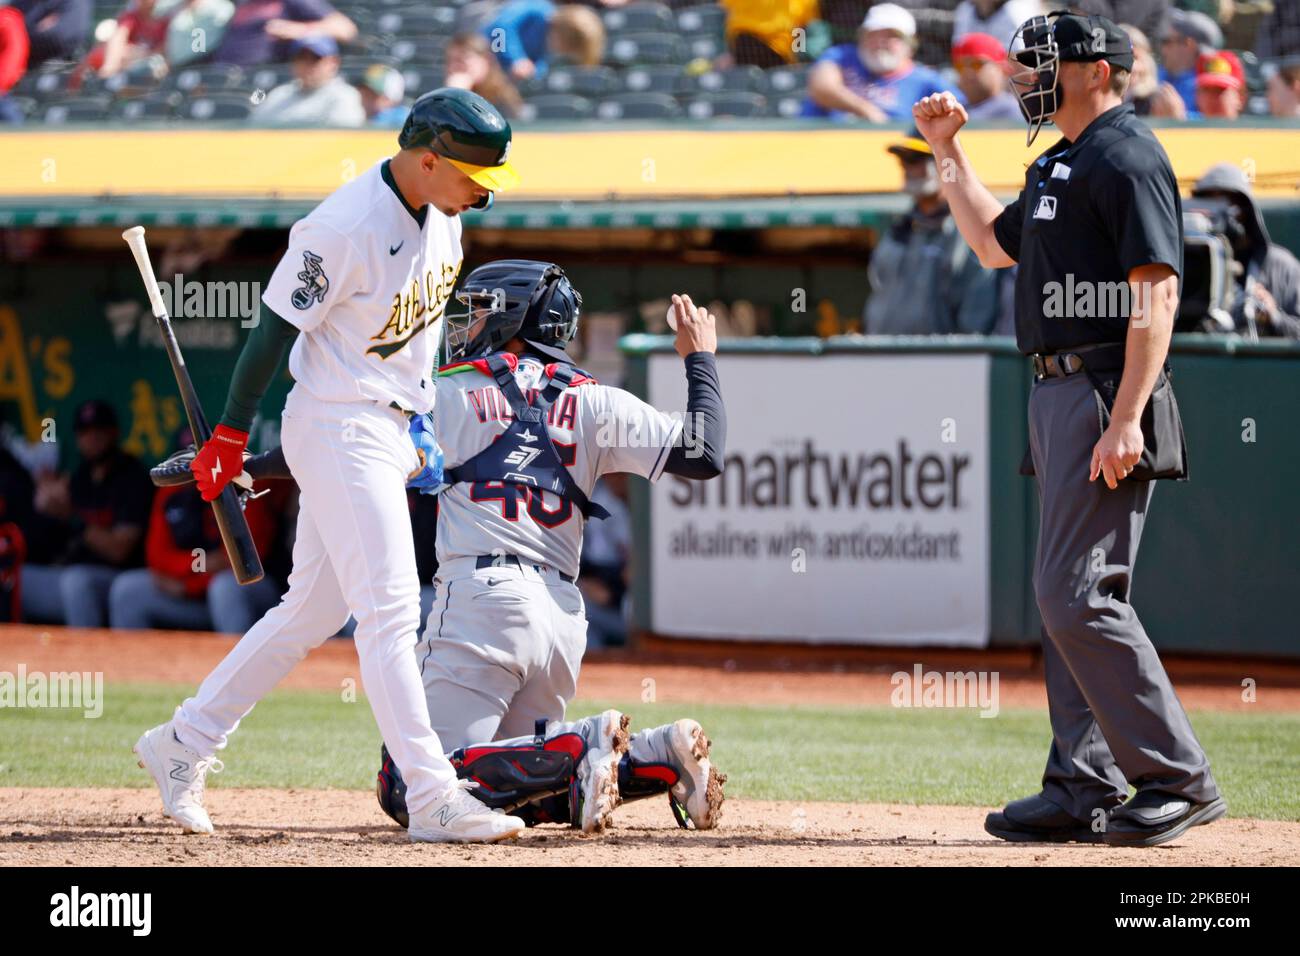 Oakland Athletics shortstop Aledmys Diaz (12) strikes out in the 10th  inning against the Cleveland Guardians at RingCentral Coliseum in Oakland,  Calif., Wednesday, April 5, 2023. (Santiago Mejia/San Francisco Chronicle  via AP